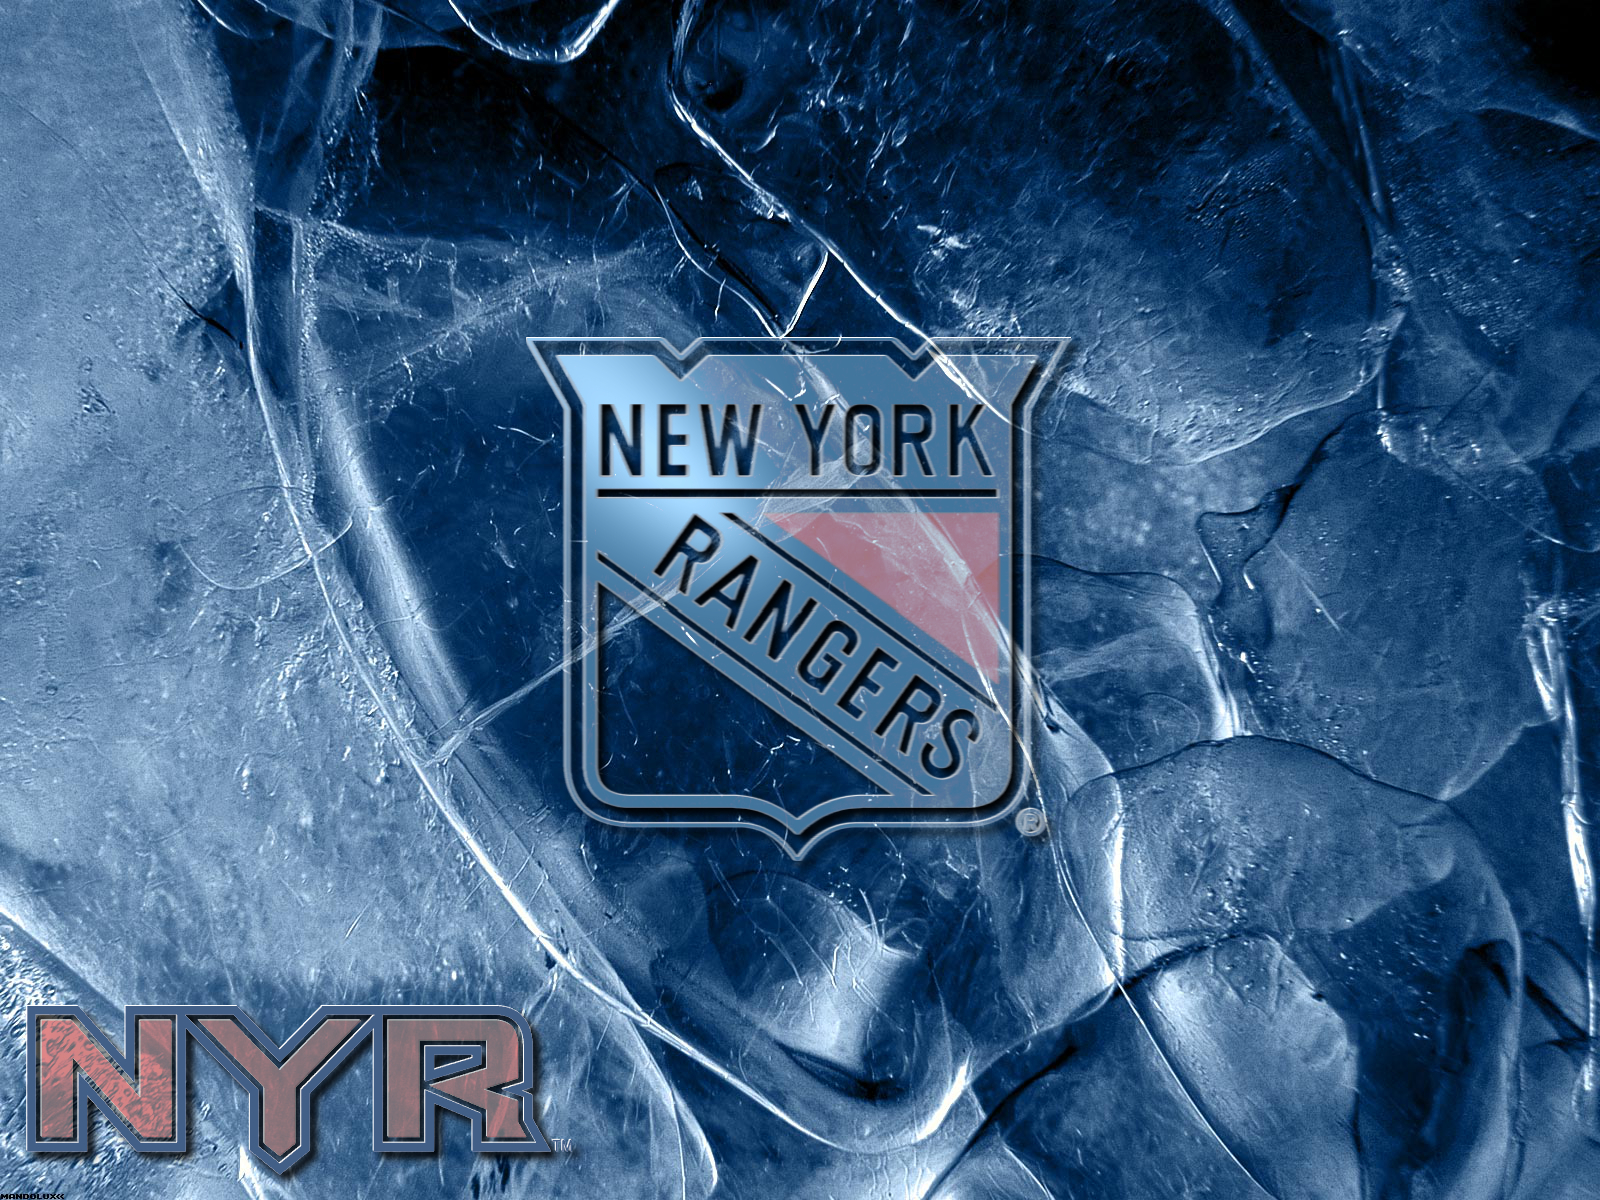 download new york rangers 20 for free